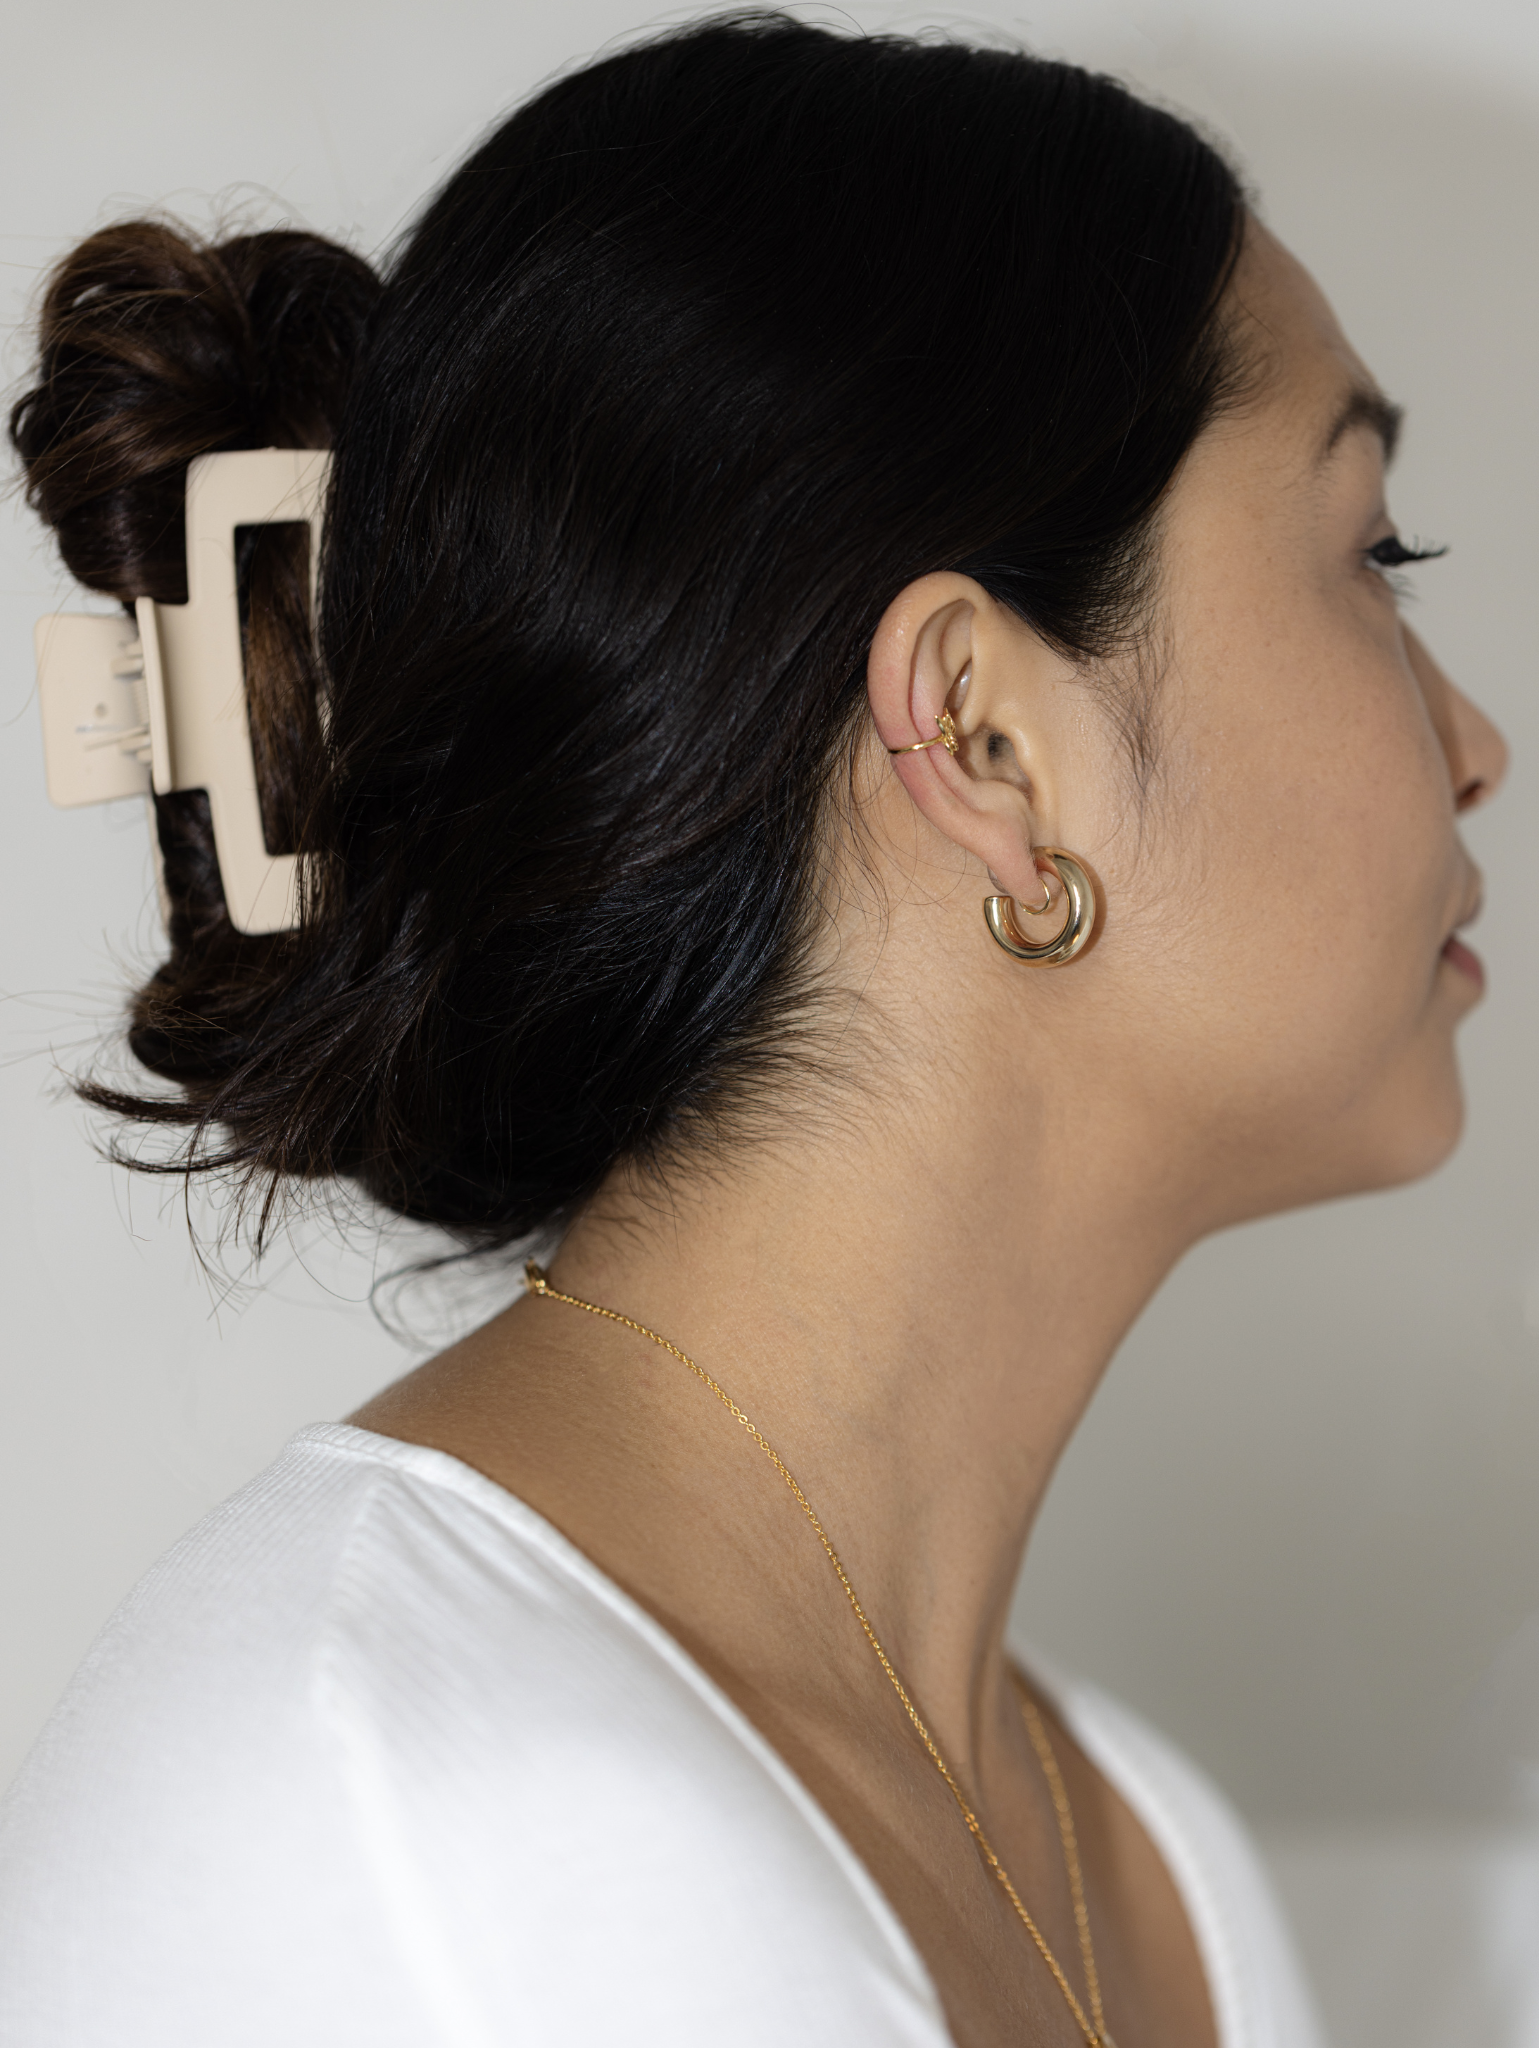 How An Ear Cuff Can Elevate Your Look